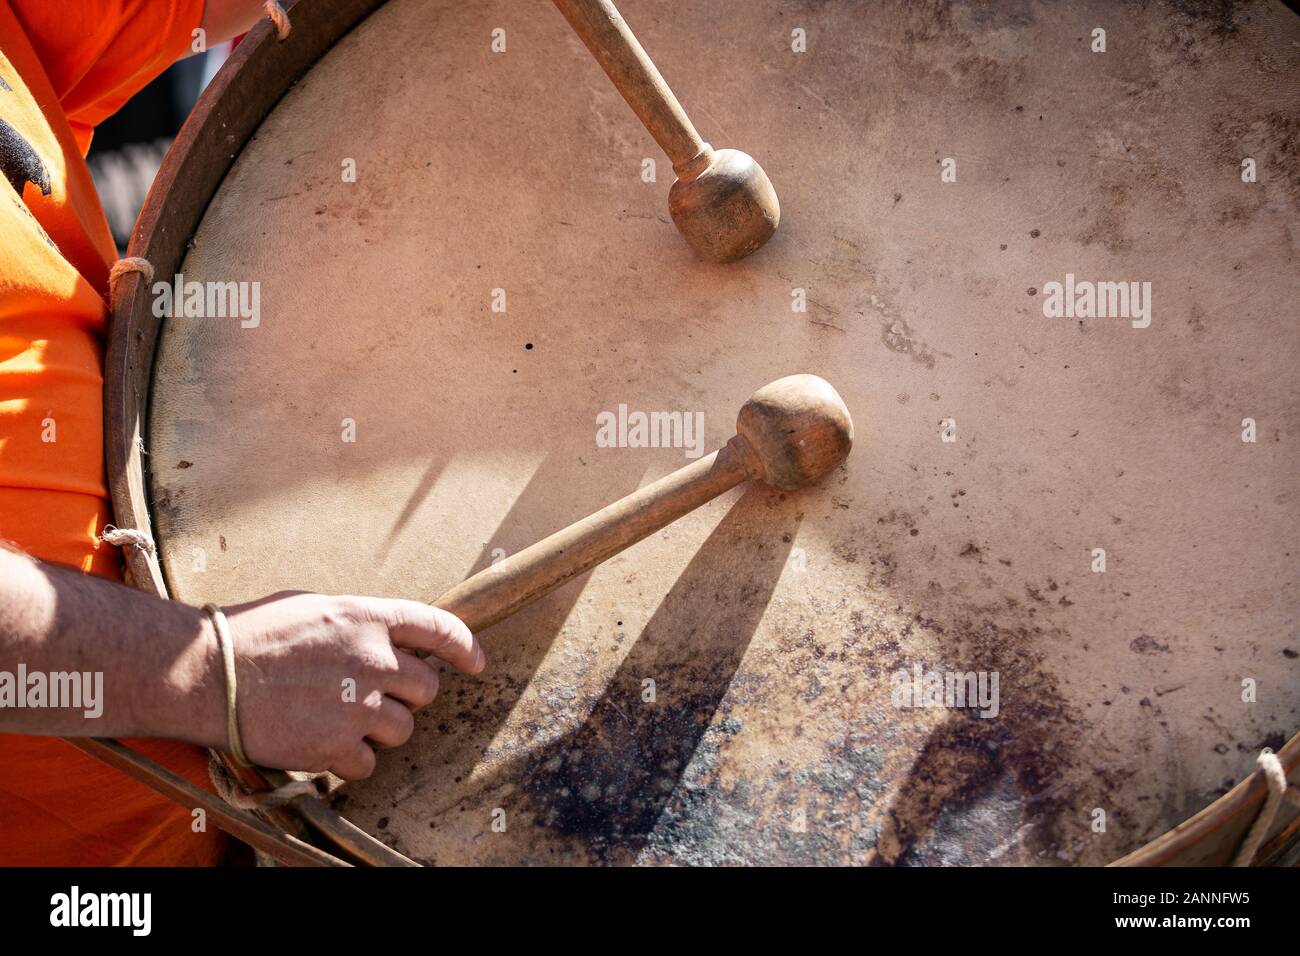 Musician hands with drum sticks playing a bass drum during an outdoor festival. Spanish culture Stock Photo